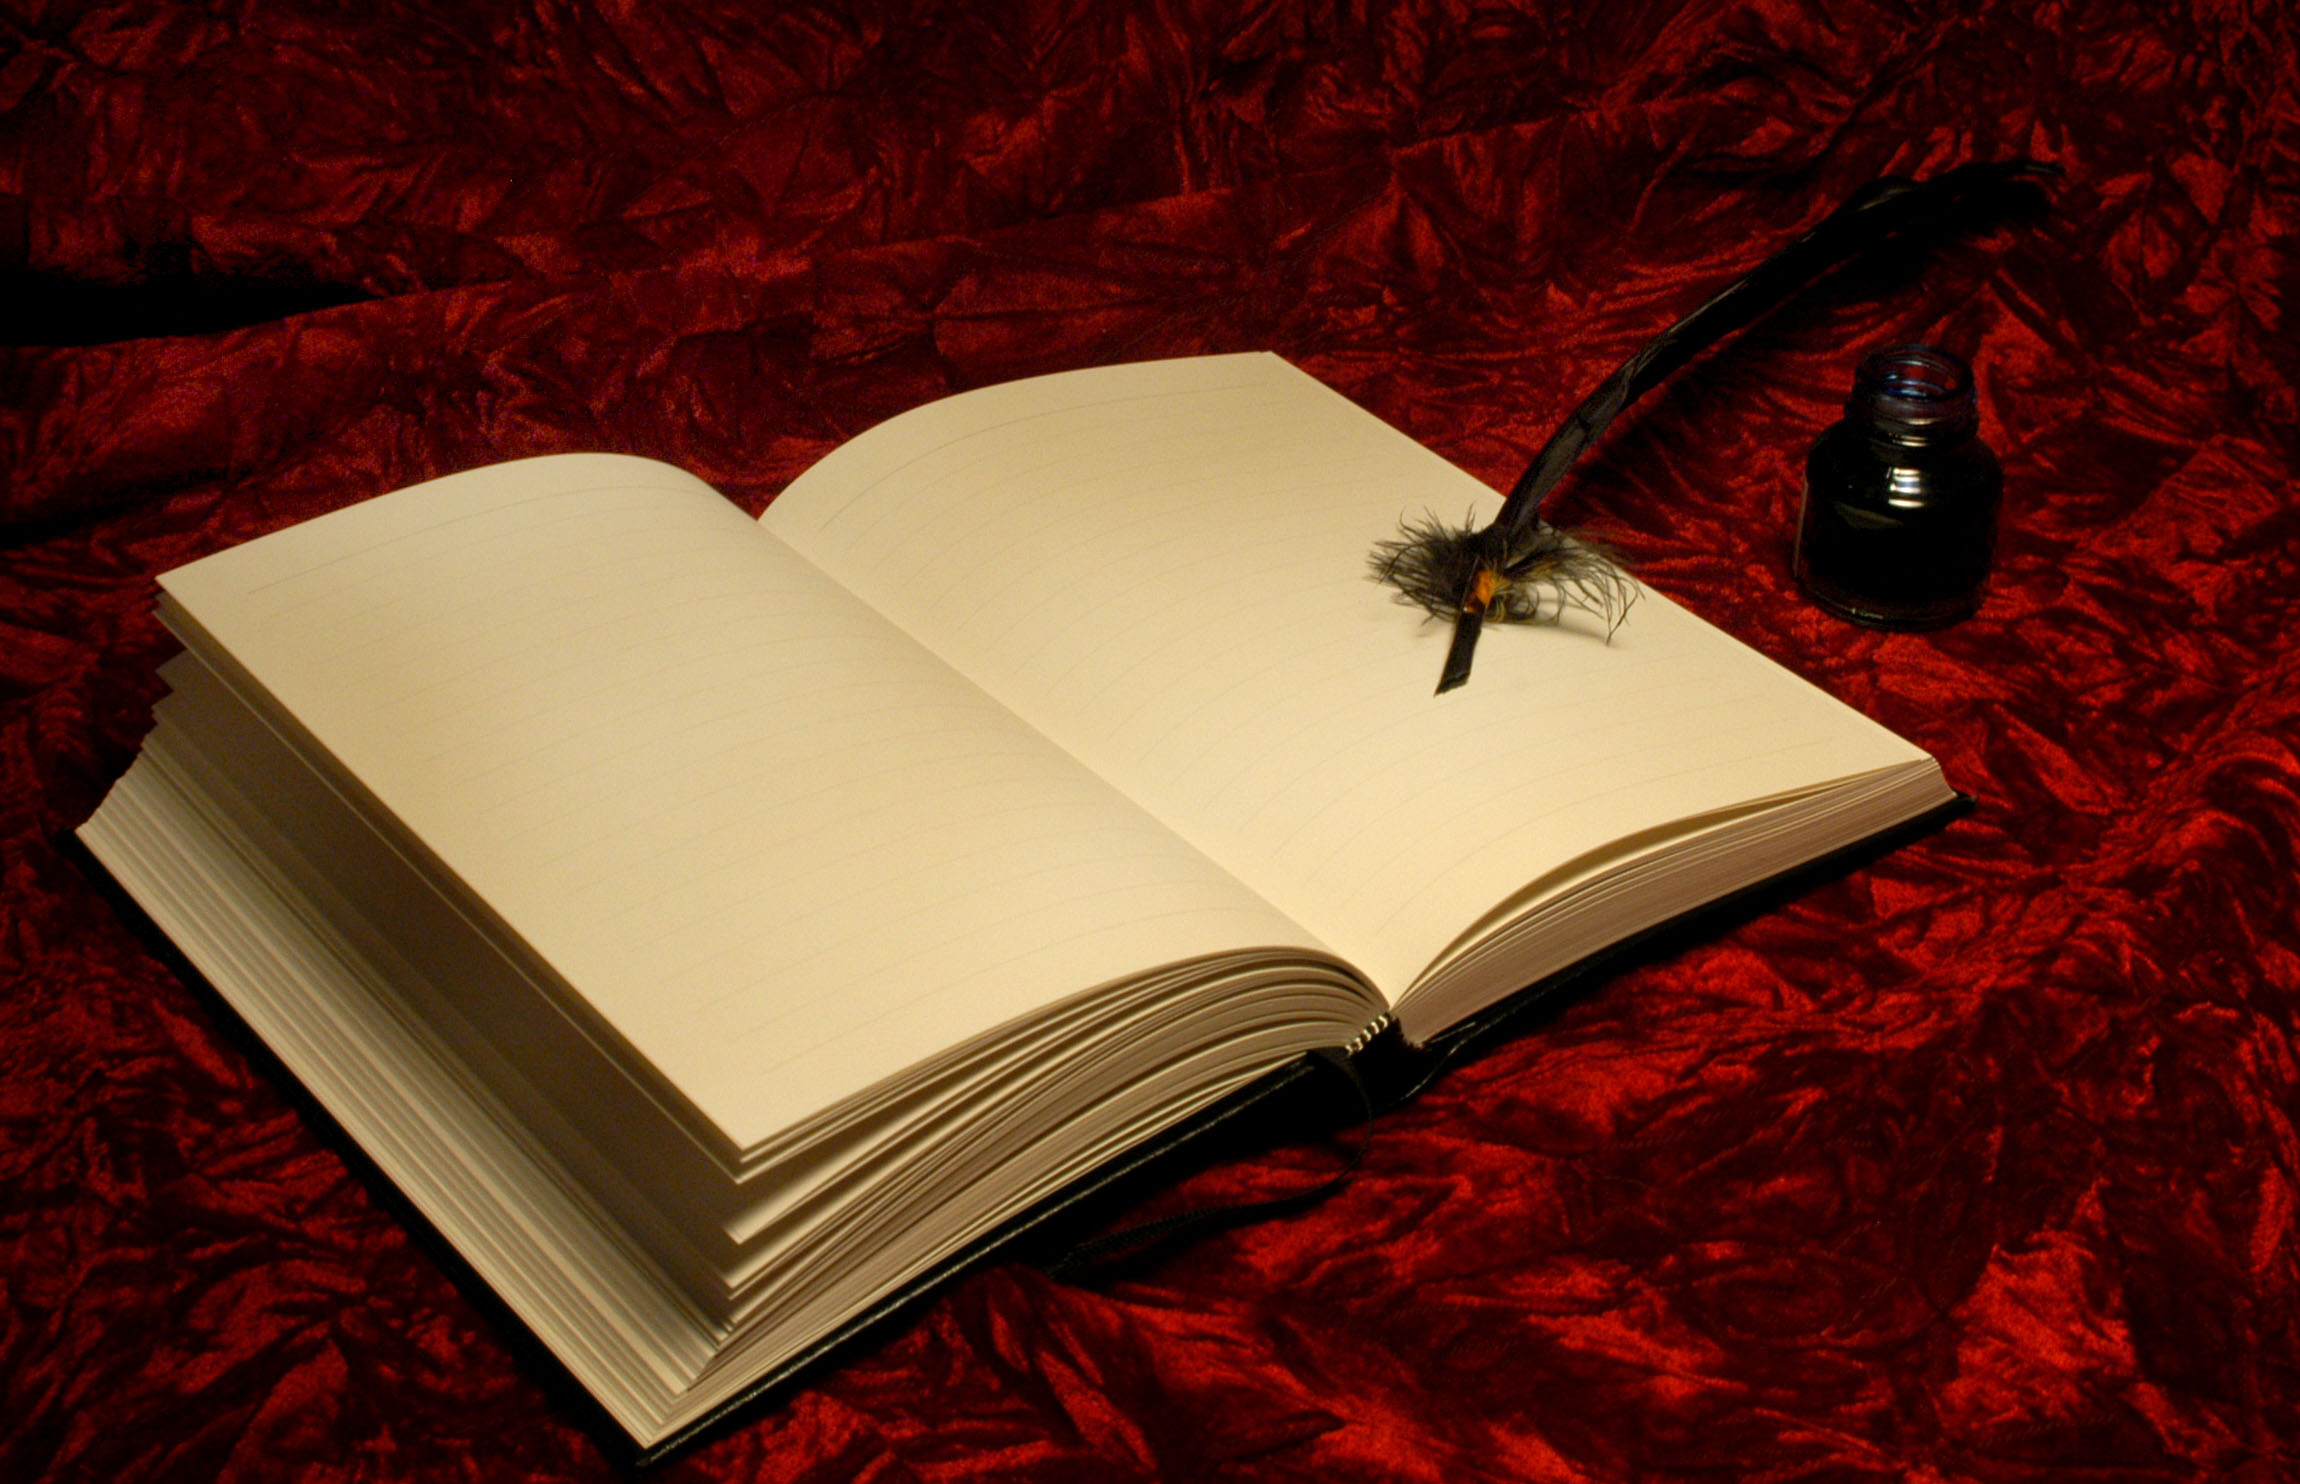 Ink, Quill and book